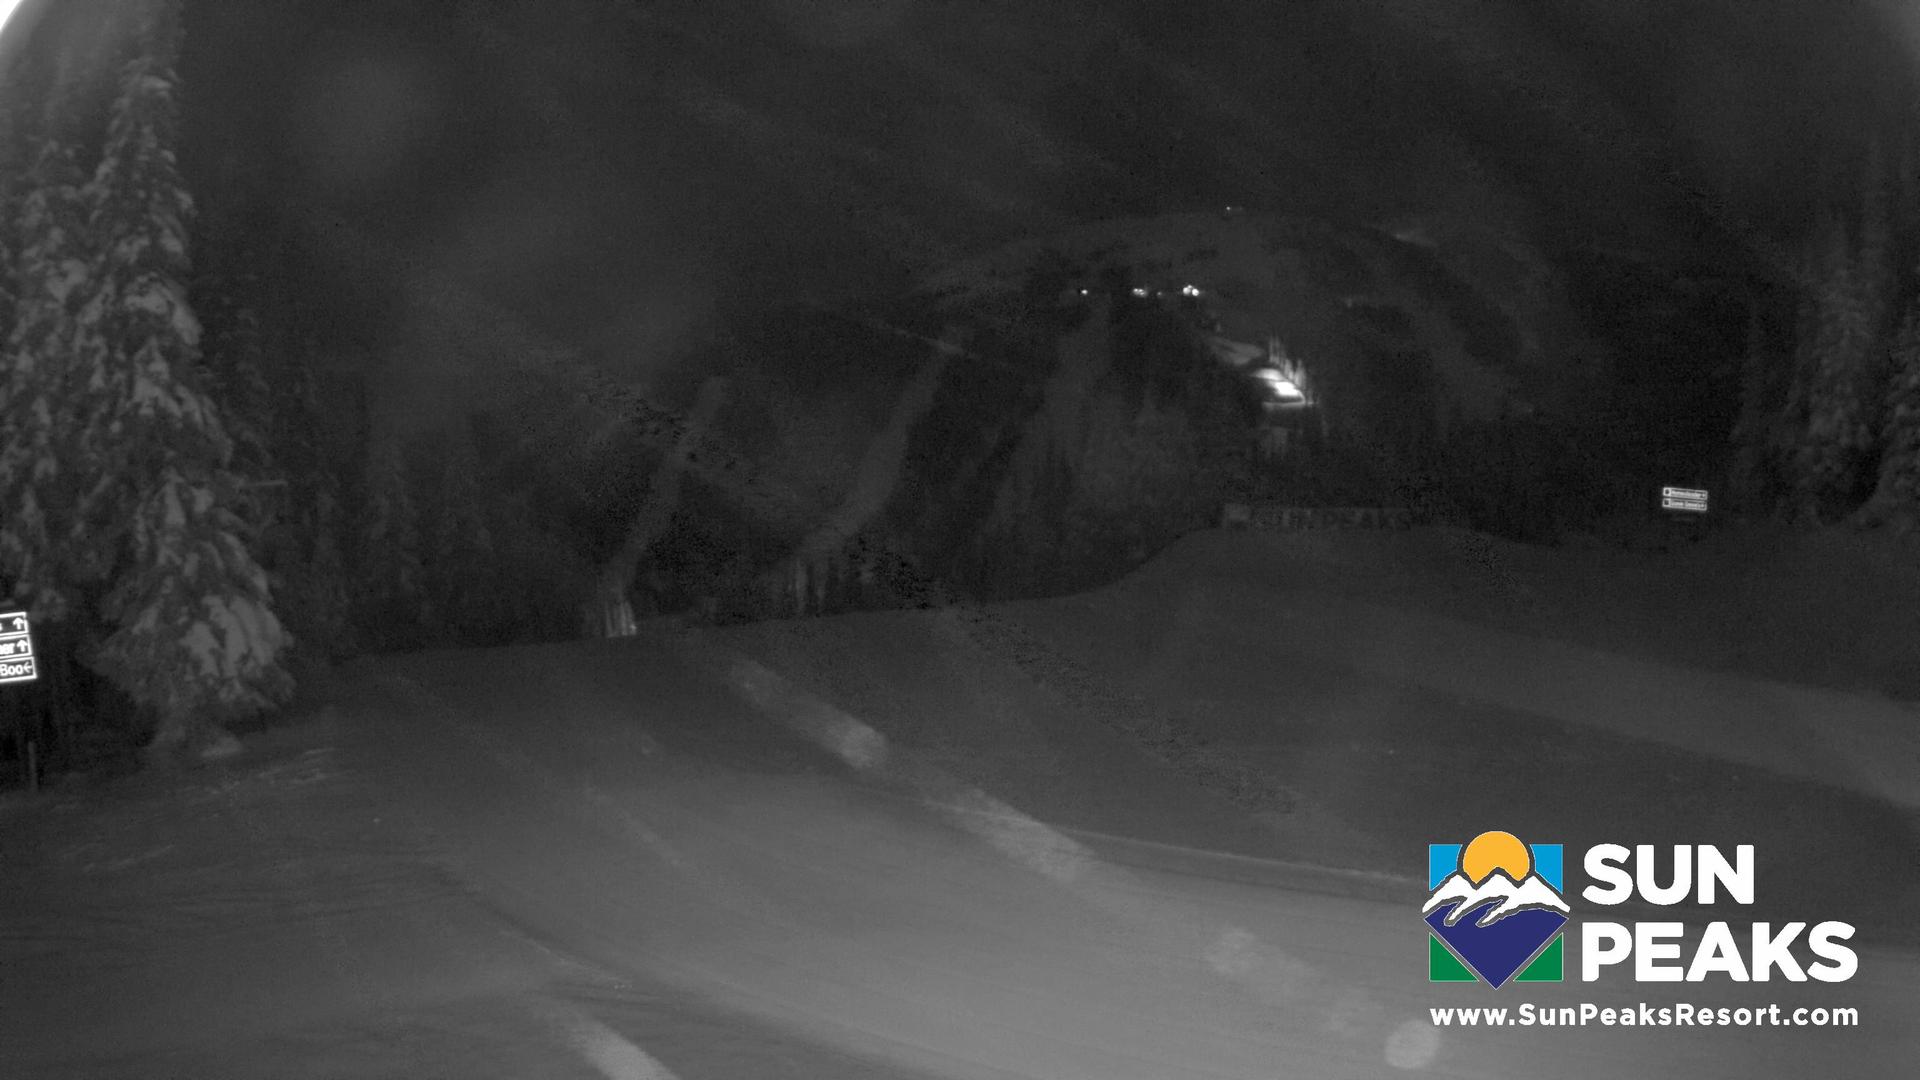 Chase: Sun Peaks - Mt. Tod from the top of the Sundance Express Traffic Camera